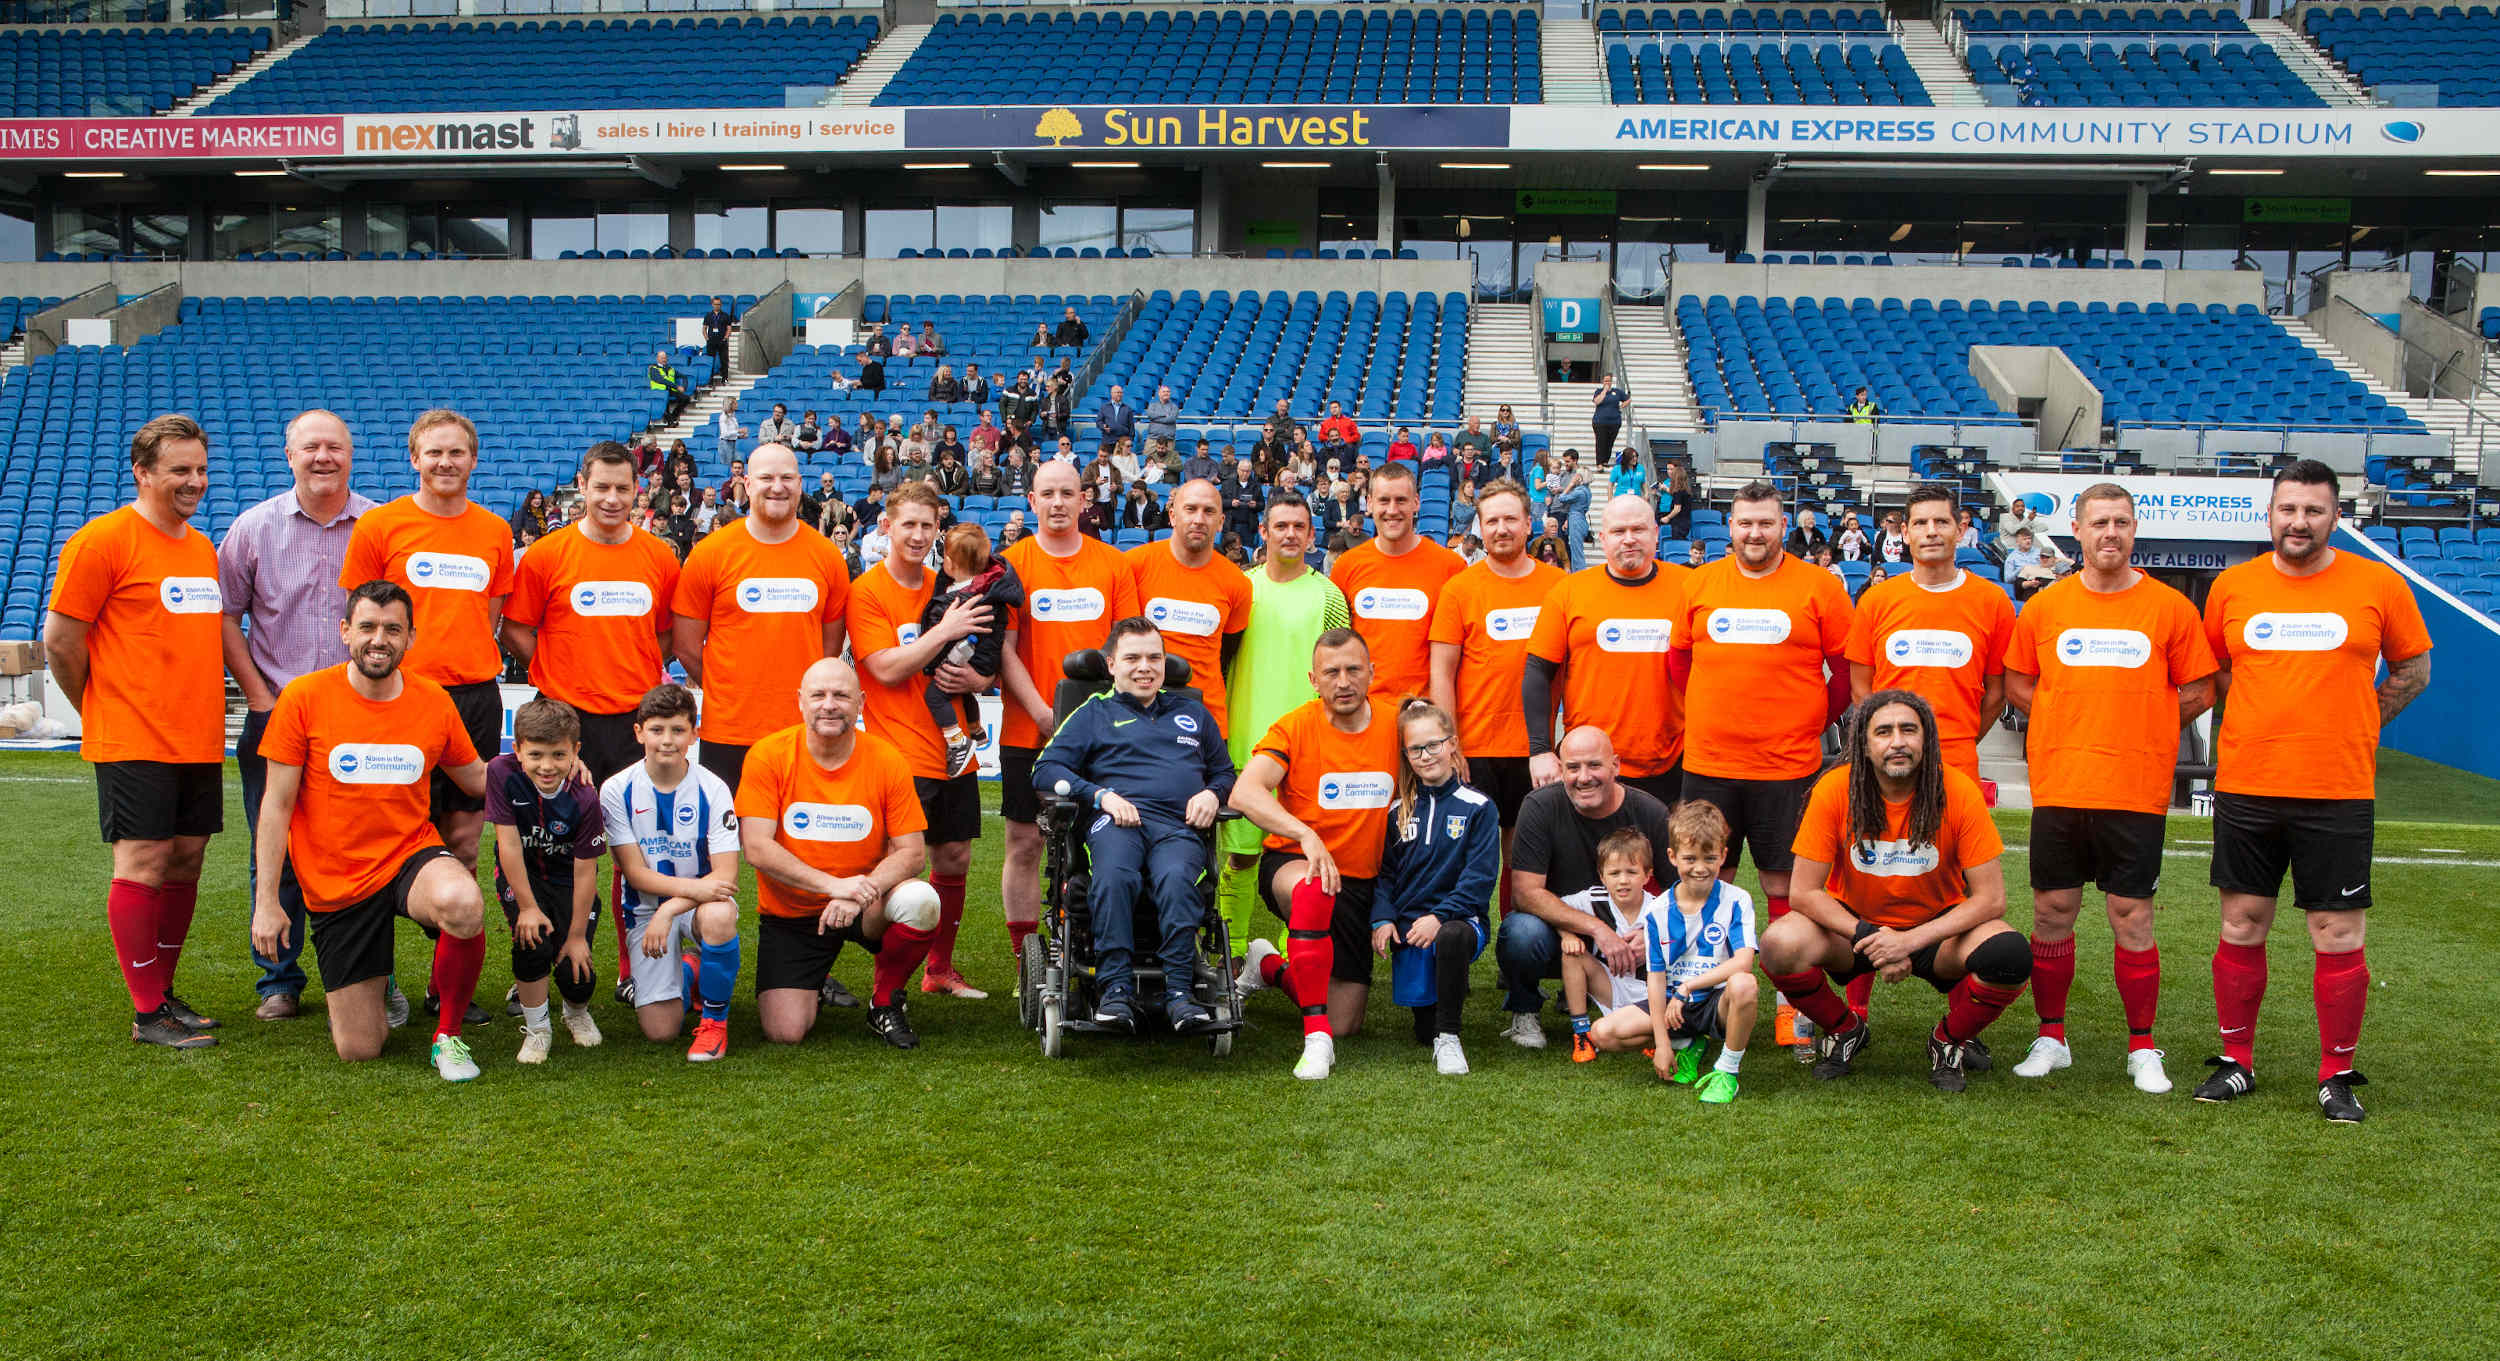 Cancer research charity football match